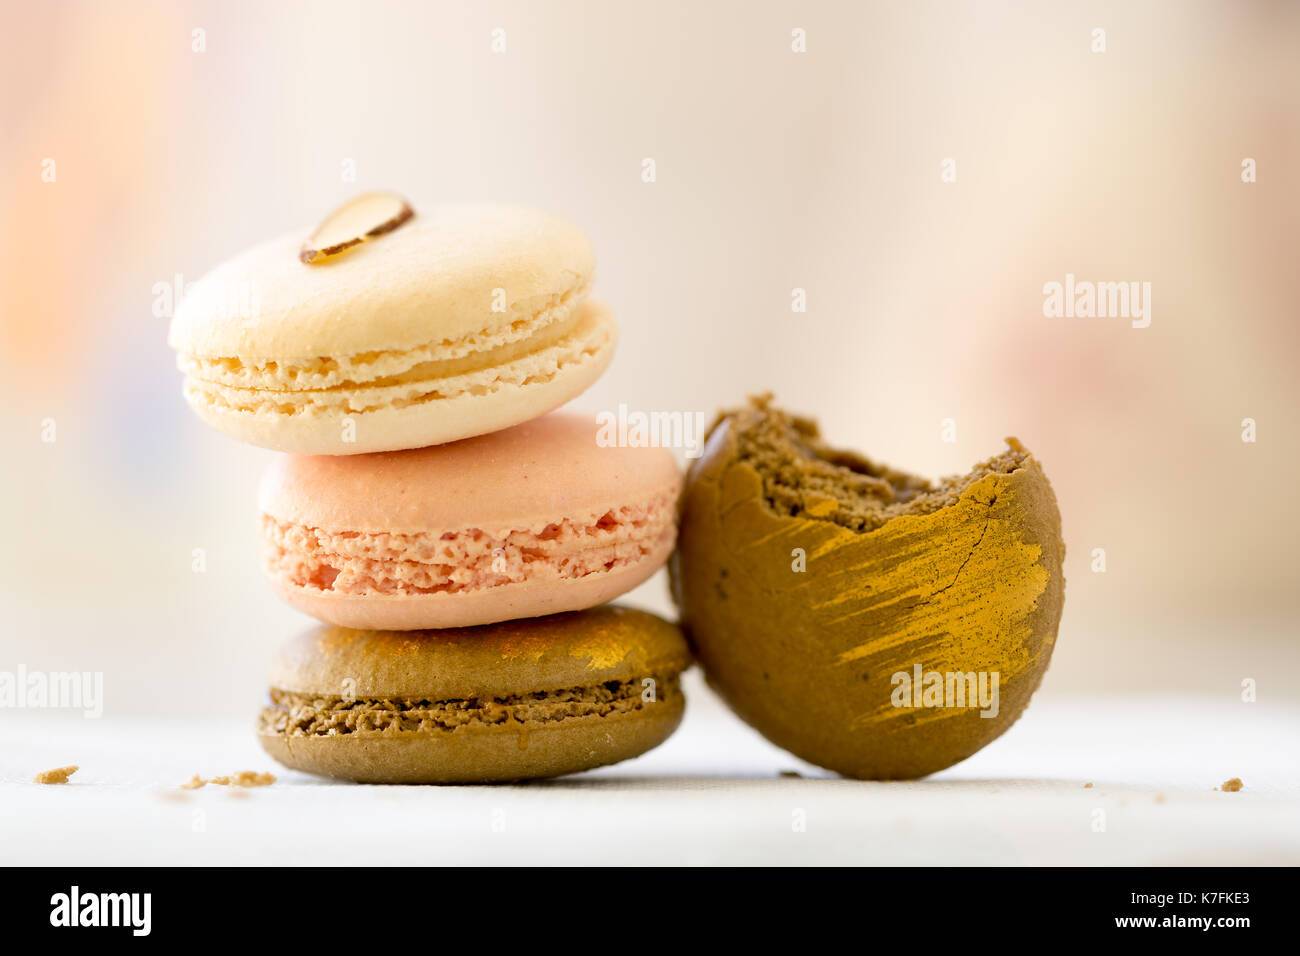 Macaroon cookies stacked pastel colors selective focus. Edible gold painted decoration. Bite out of one cookie Stock Photo